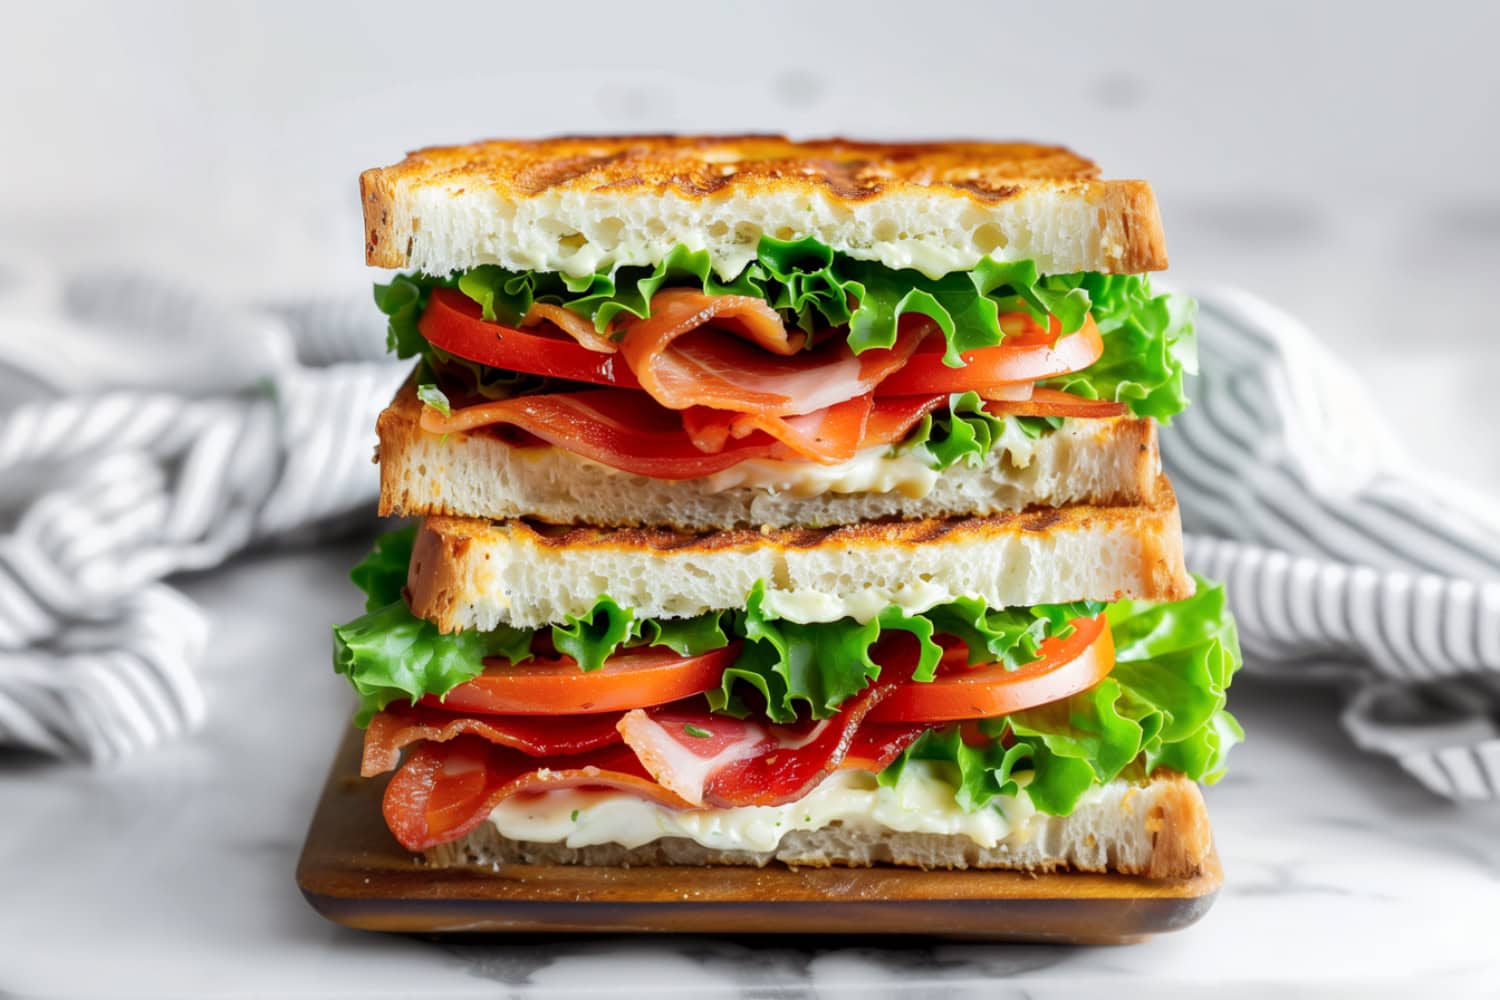 Mouthwatering BLT sandwich, showcasing bacon, lettuce, and tomato on sourdough toast.